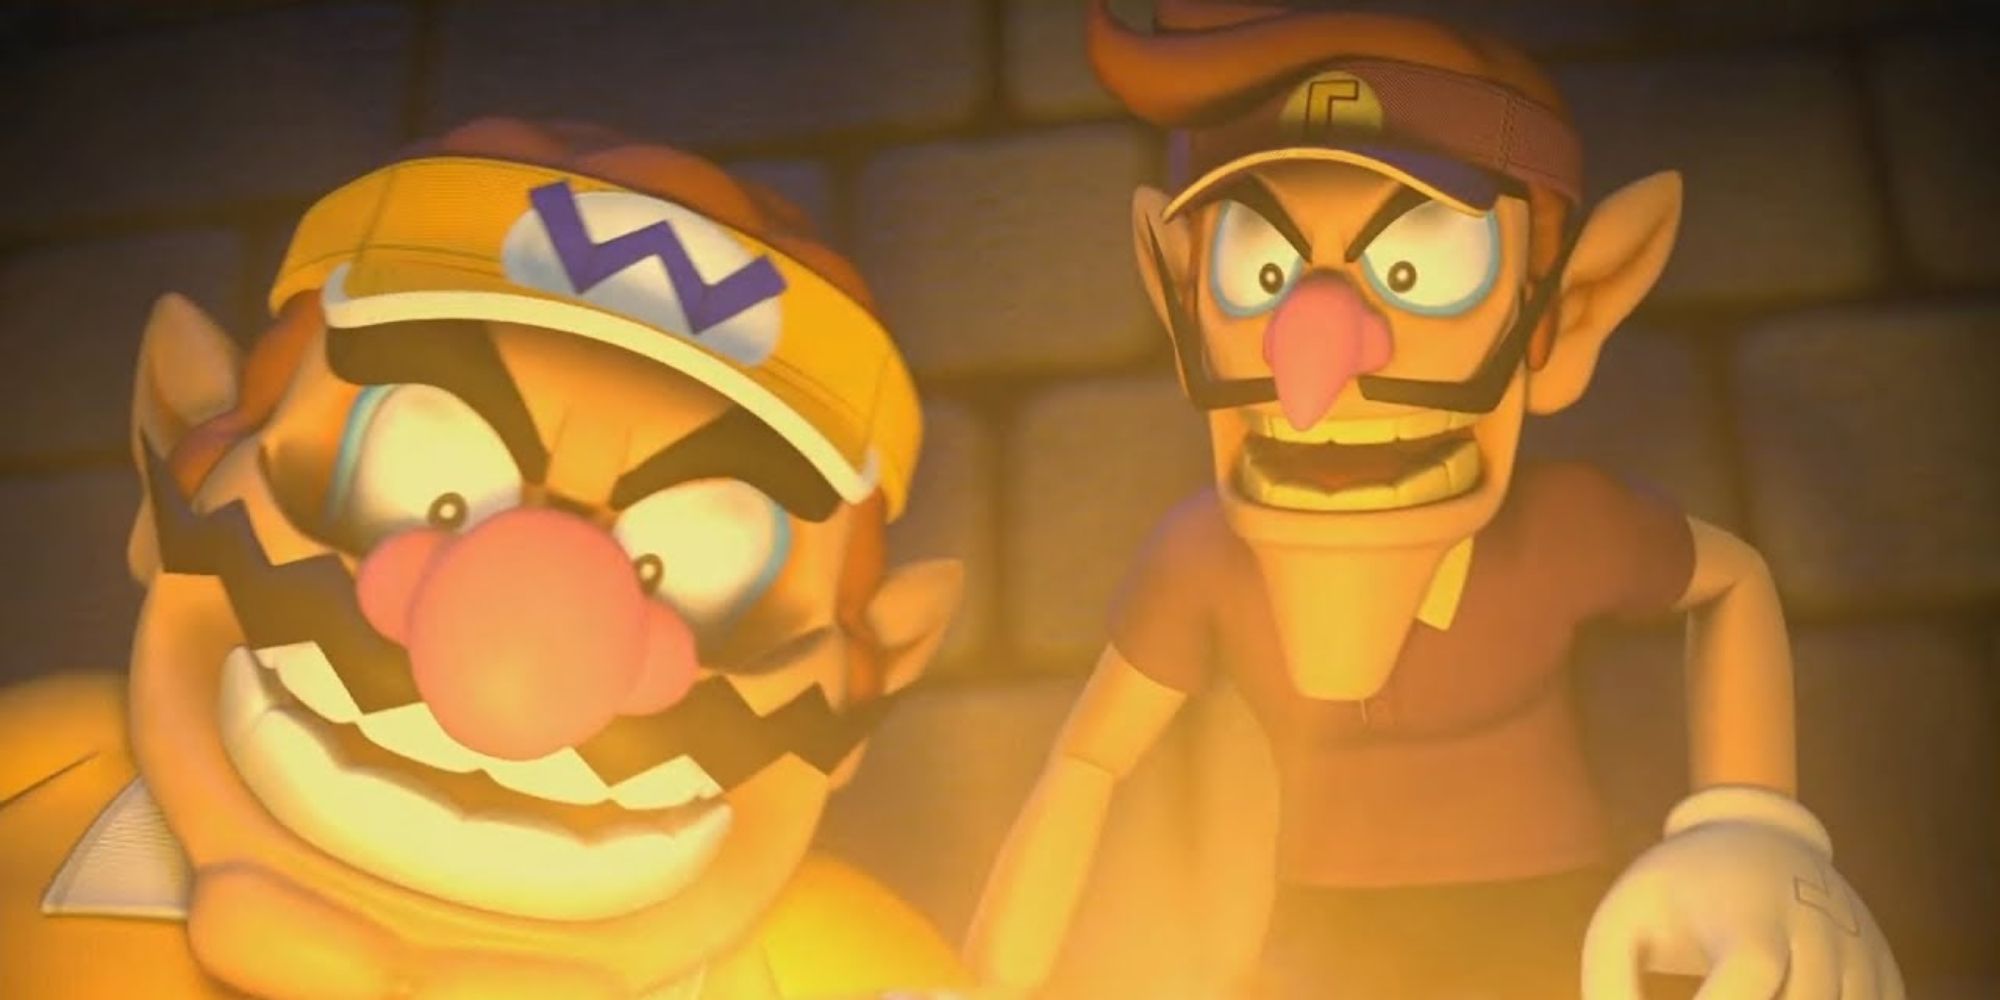 Wario and Waluigi staring at something shiny in tennis outfits